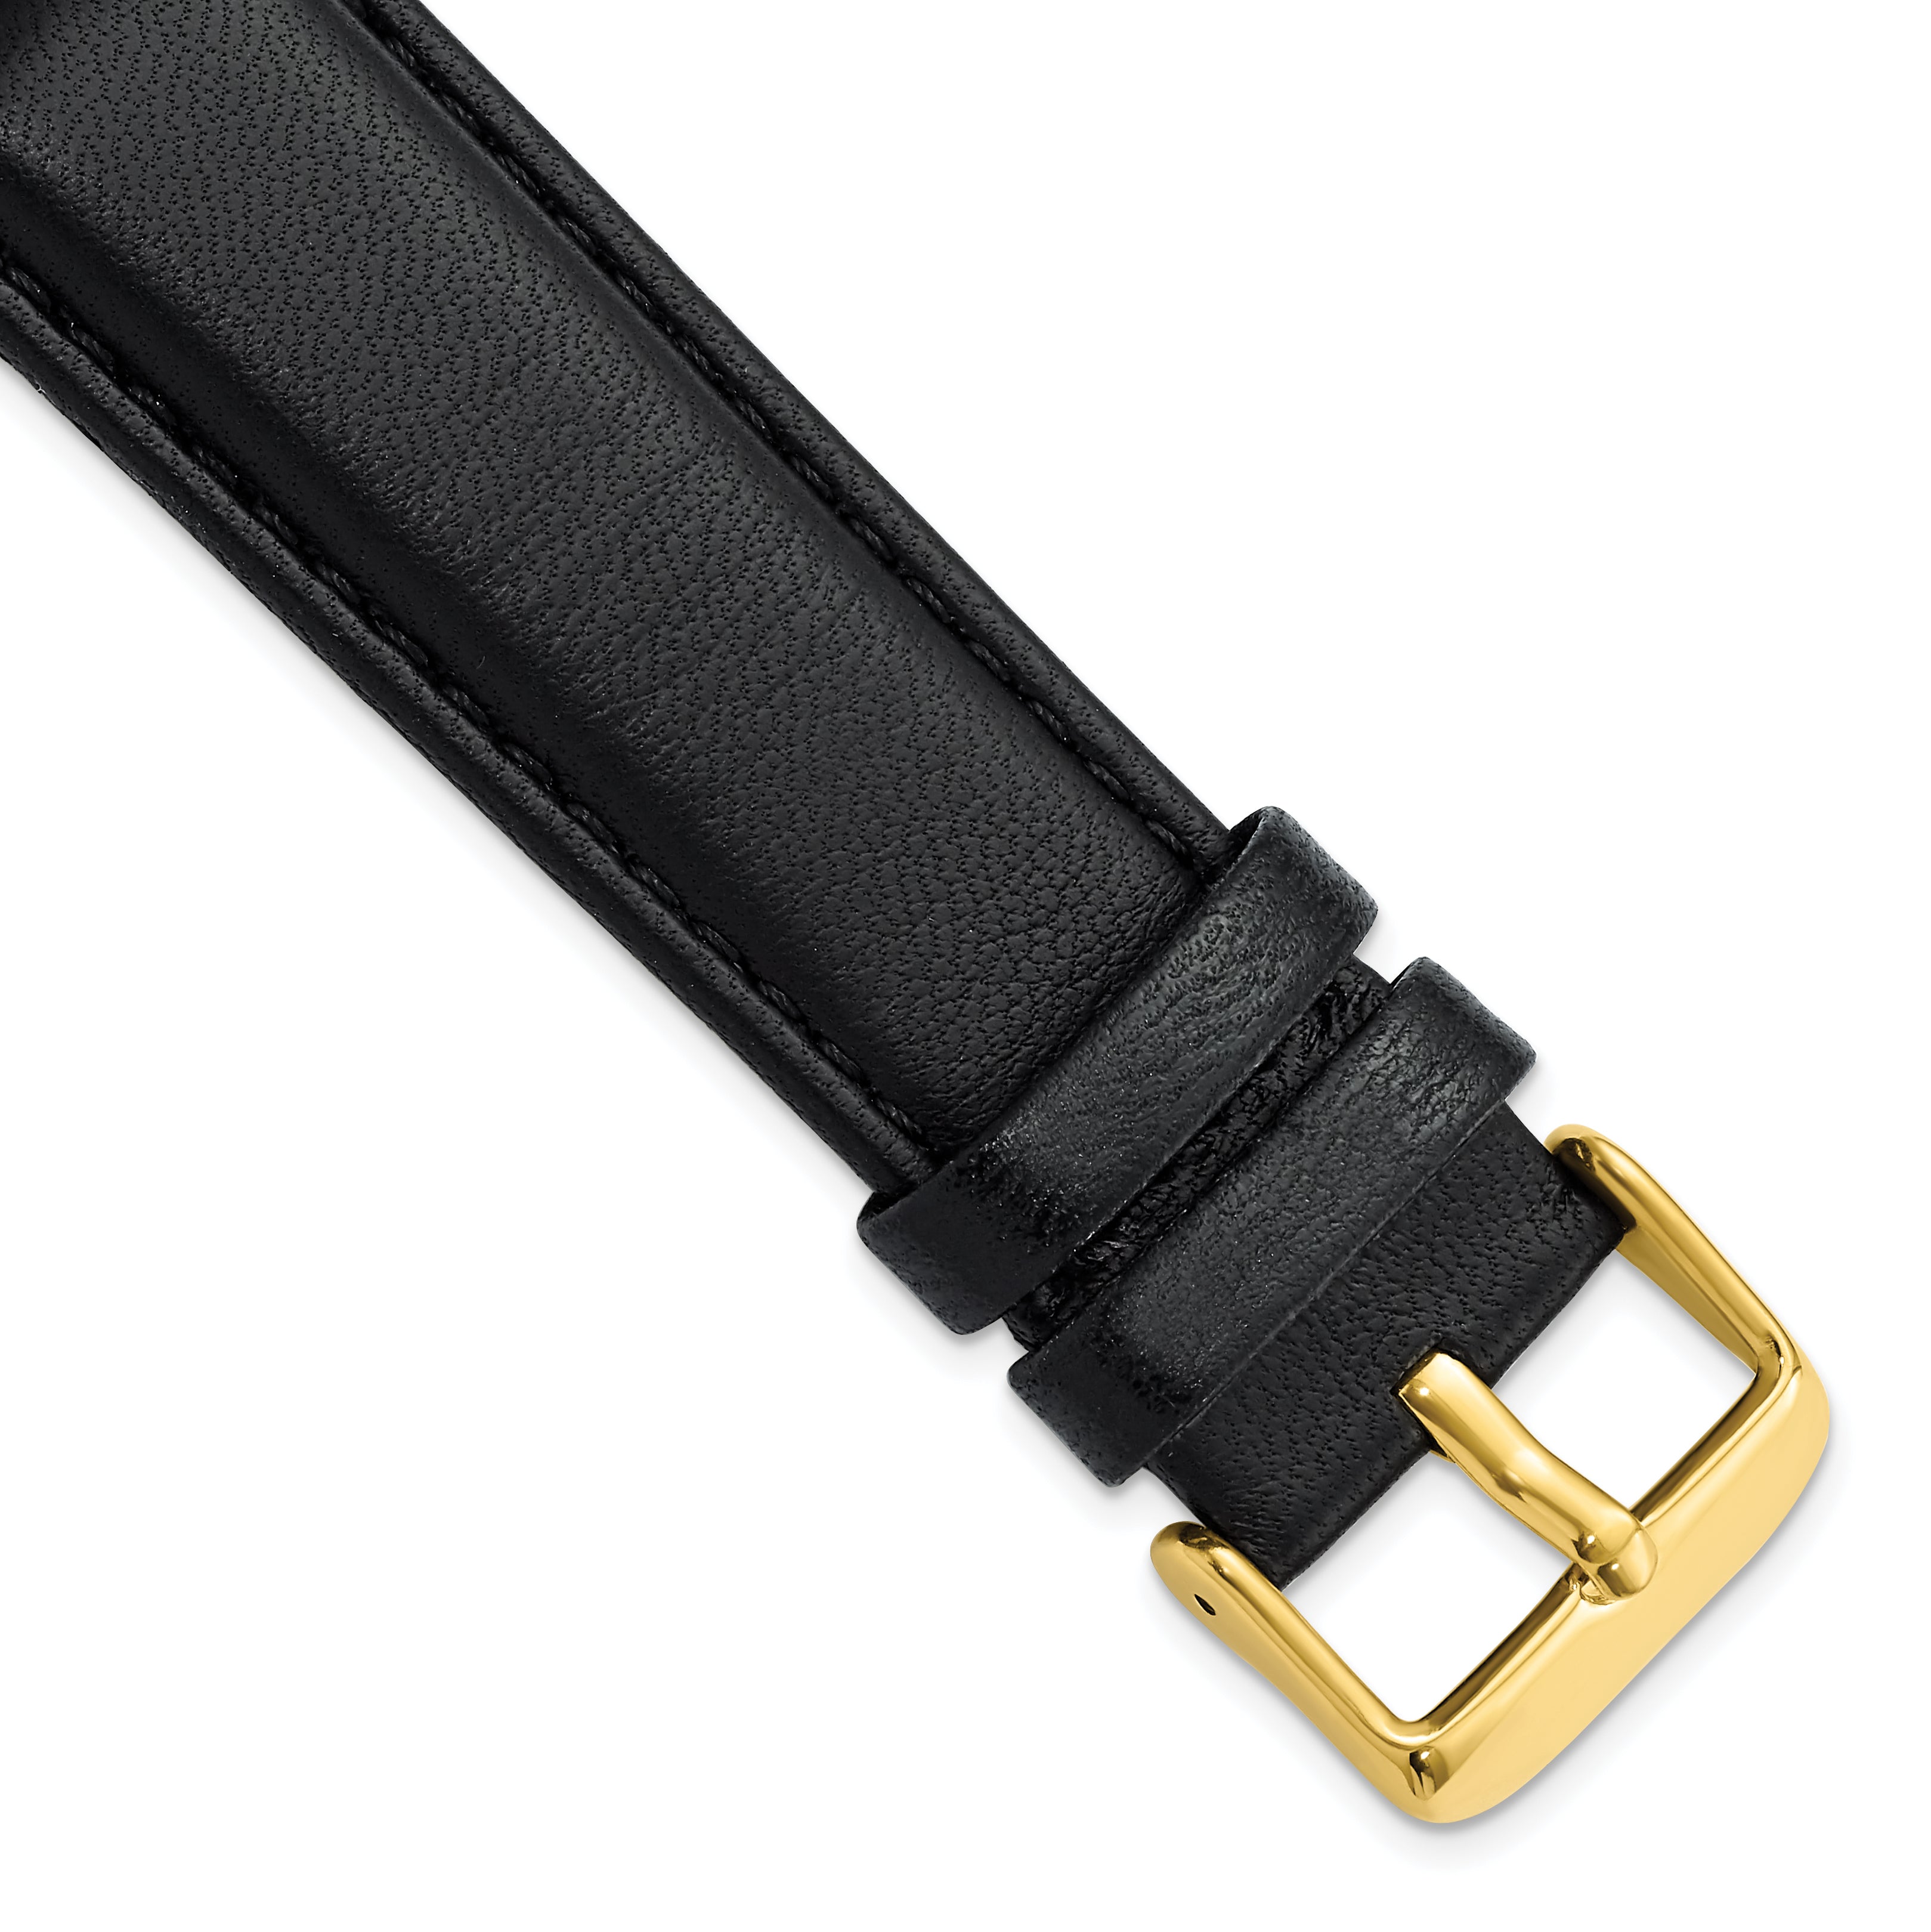 DeBeer 22mm Black Glove Leather with Gold-tone Panerai Style Buckle 7.75 inch Watch Band